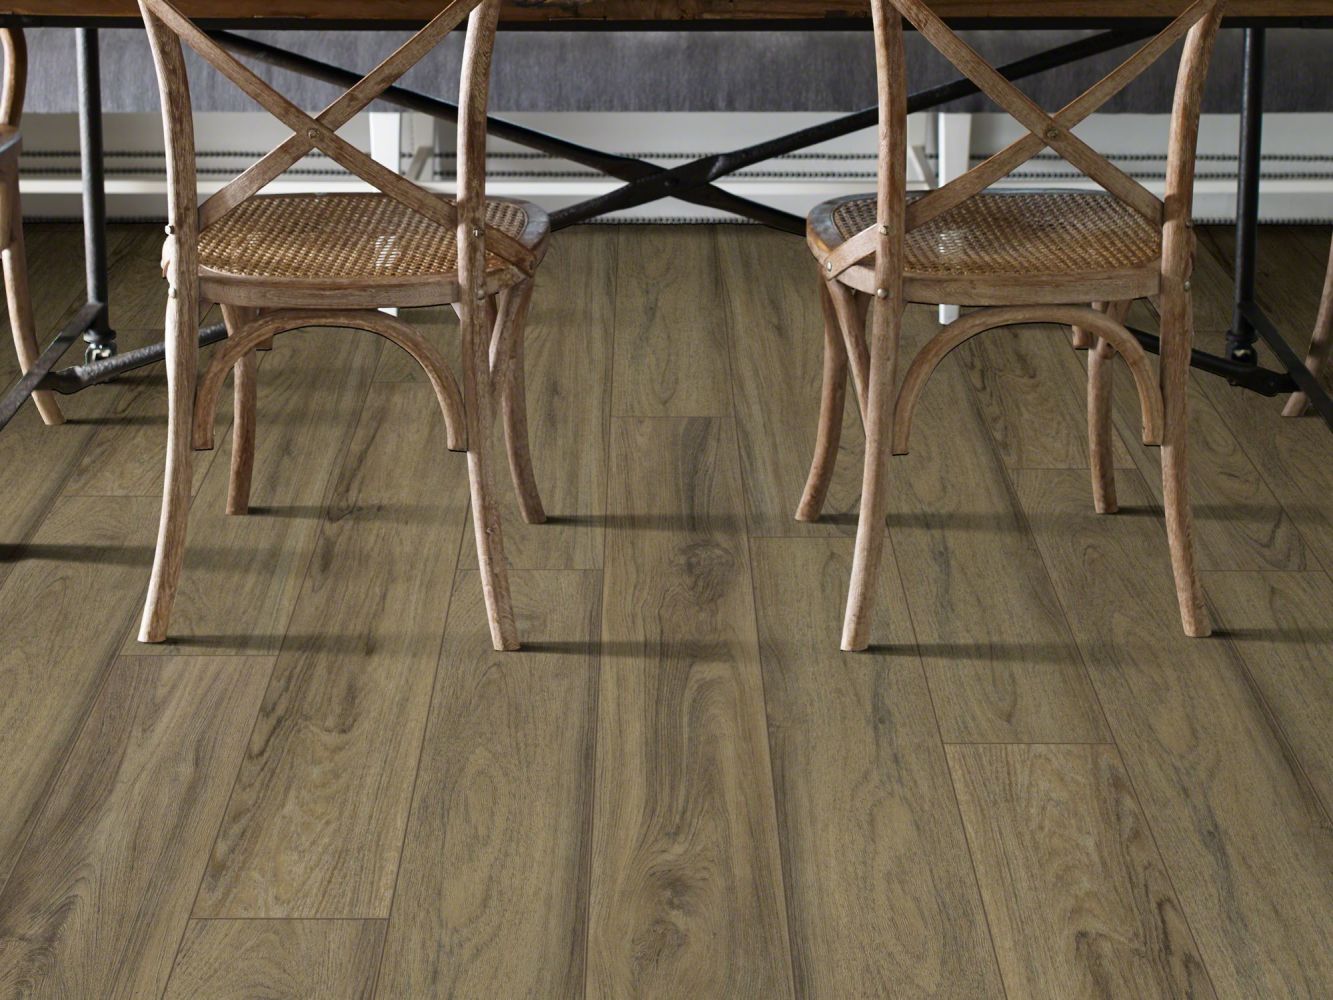 Shaw Floors Resilient Residential Mountainside HD Fiano 00587_VH549